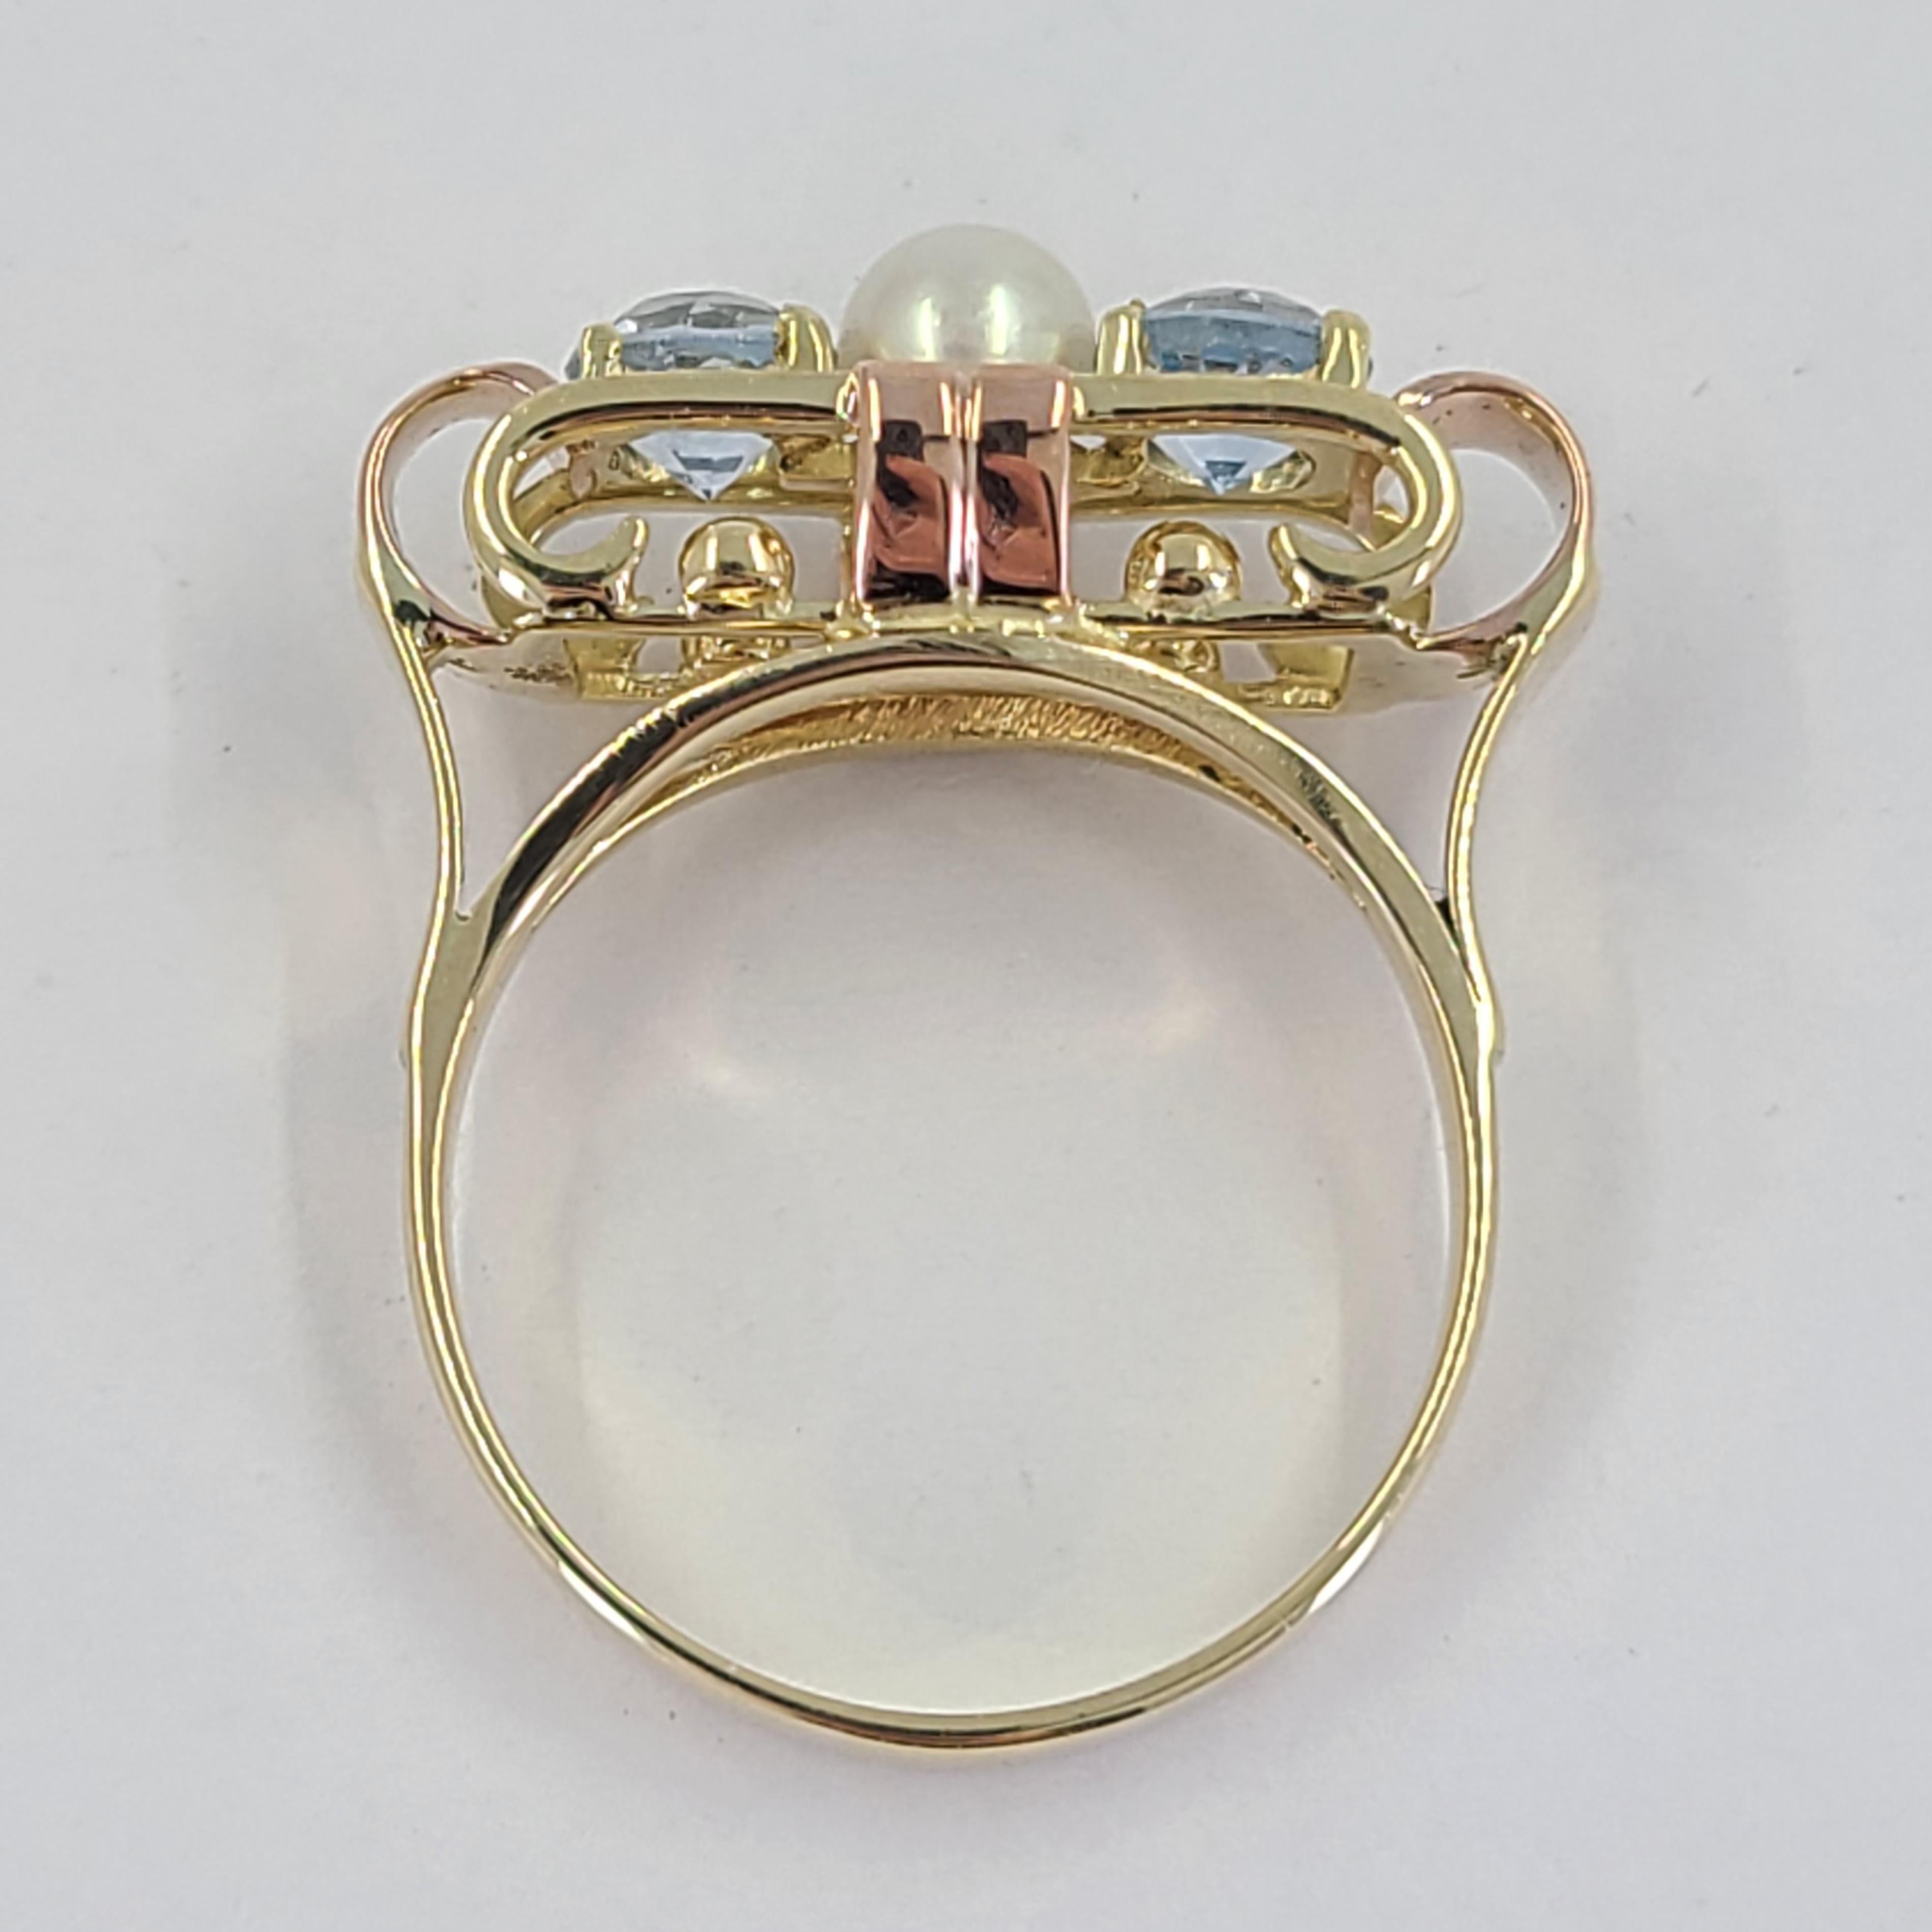 14 Karat Yellow & Rose Gold Retro Ring With Open Work Design Featuring A Round 4mm Cultured Pearl & Two 4.5mm Round Aquamarines. Finished Weight Is 4.3 Grams. Finger Size 6.